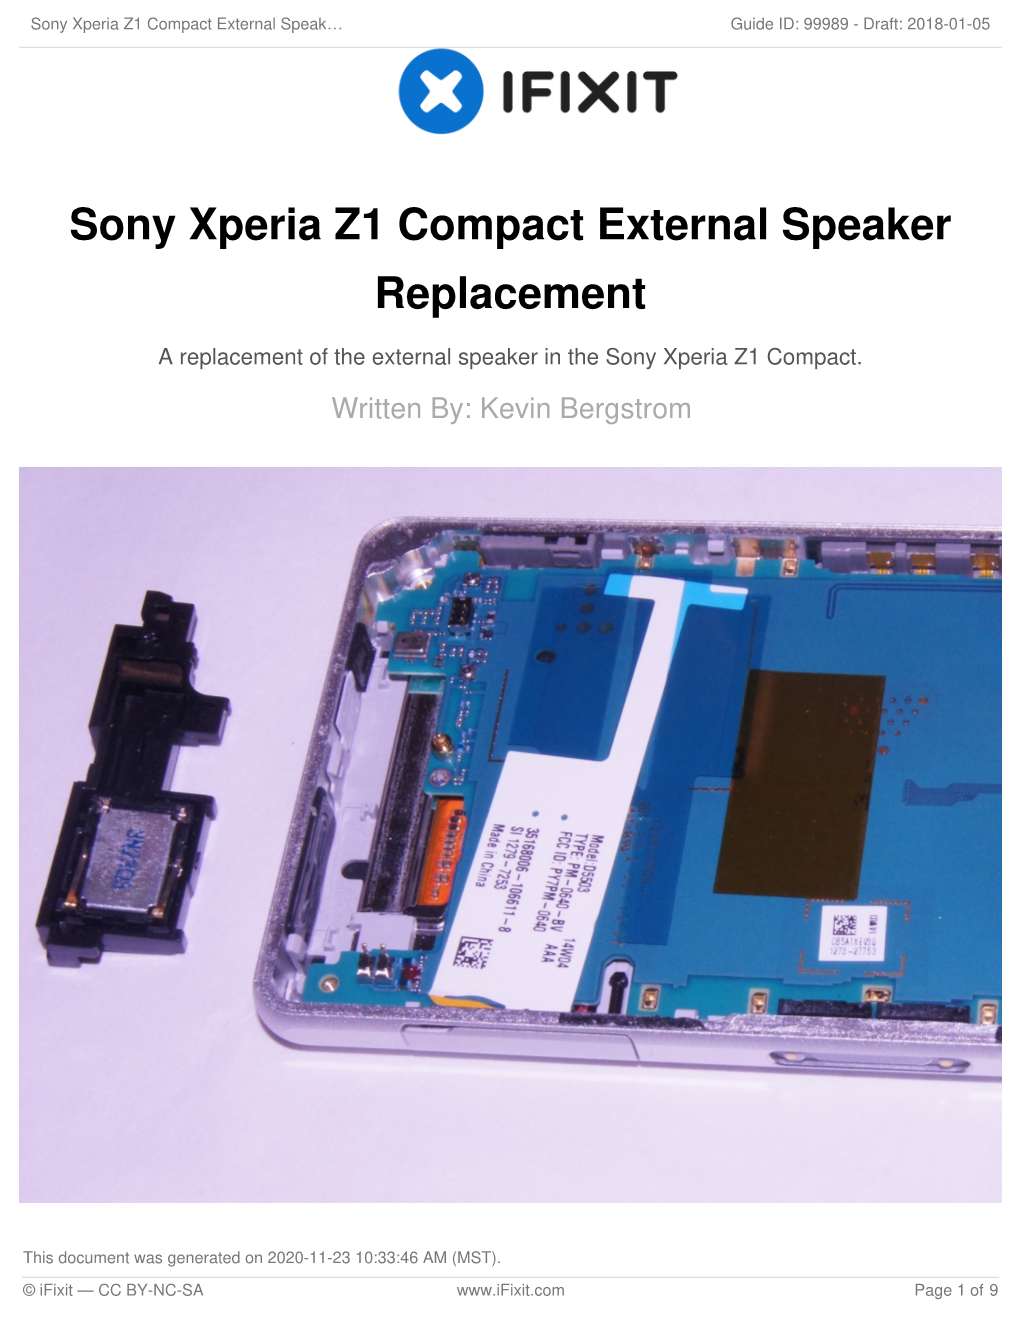 Sony Xperia Z1 Compact External Speaker Replacement